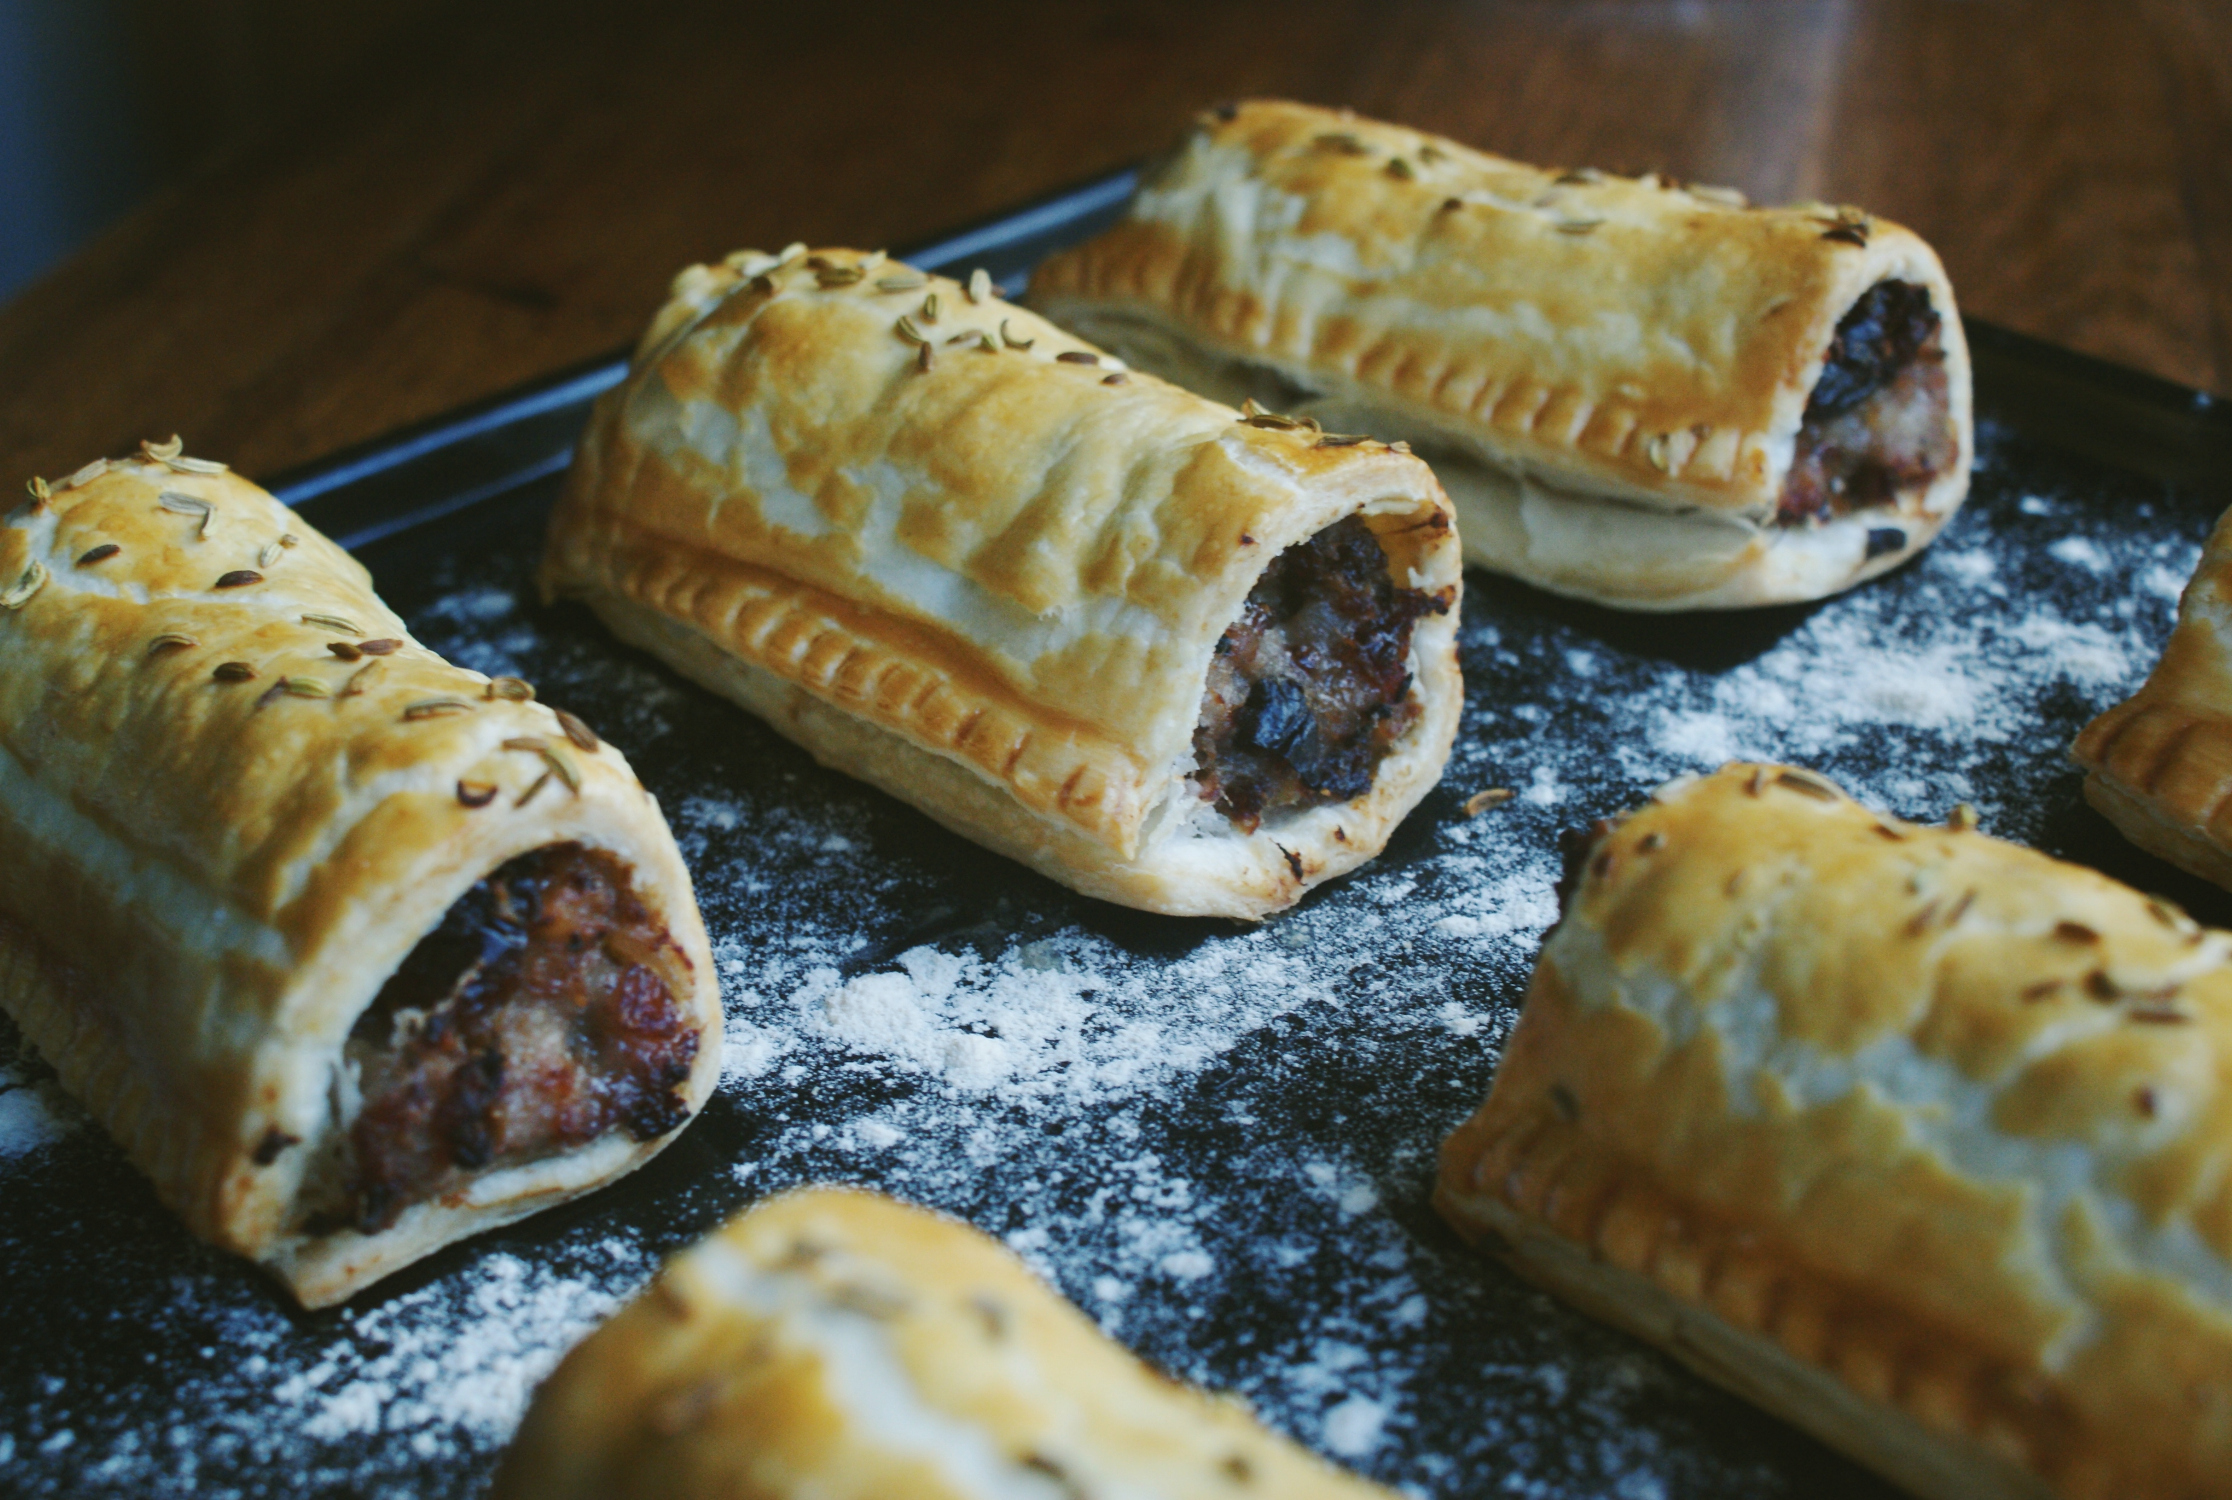 Prune and fennel sausage rolls